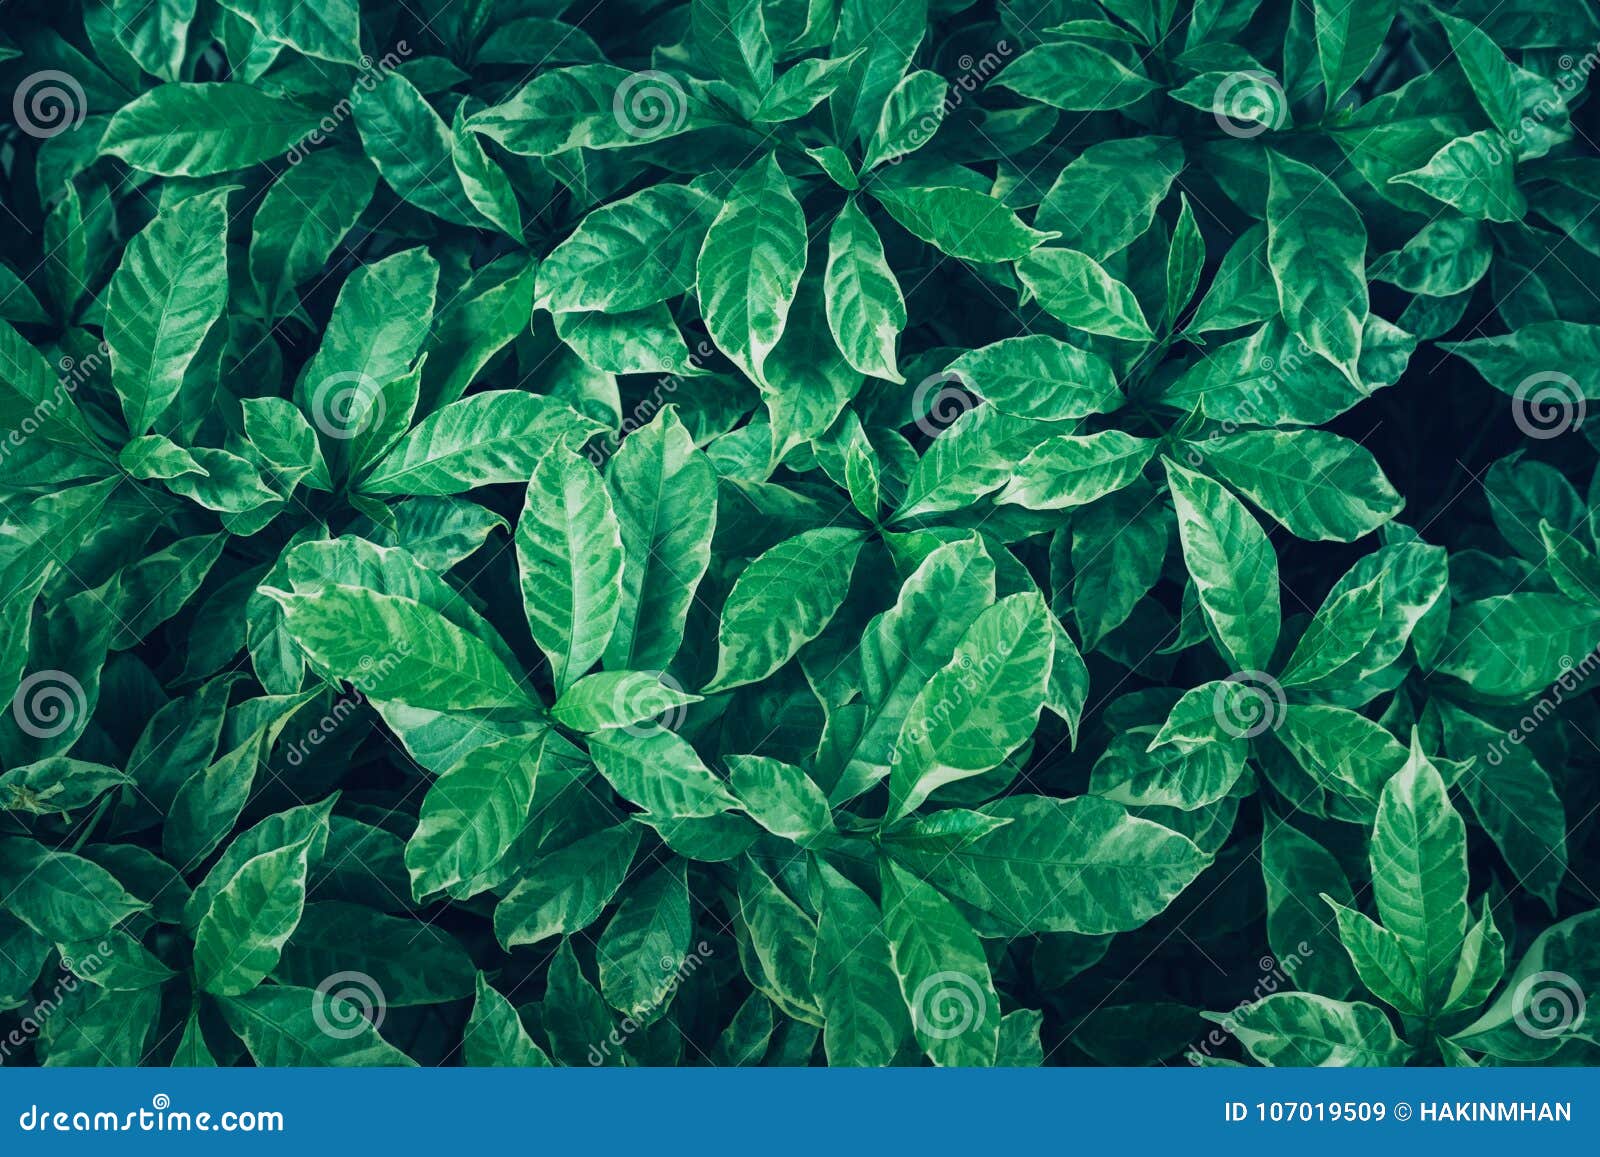 green leaves background .flat lay.top view of leaf.nature